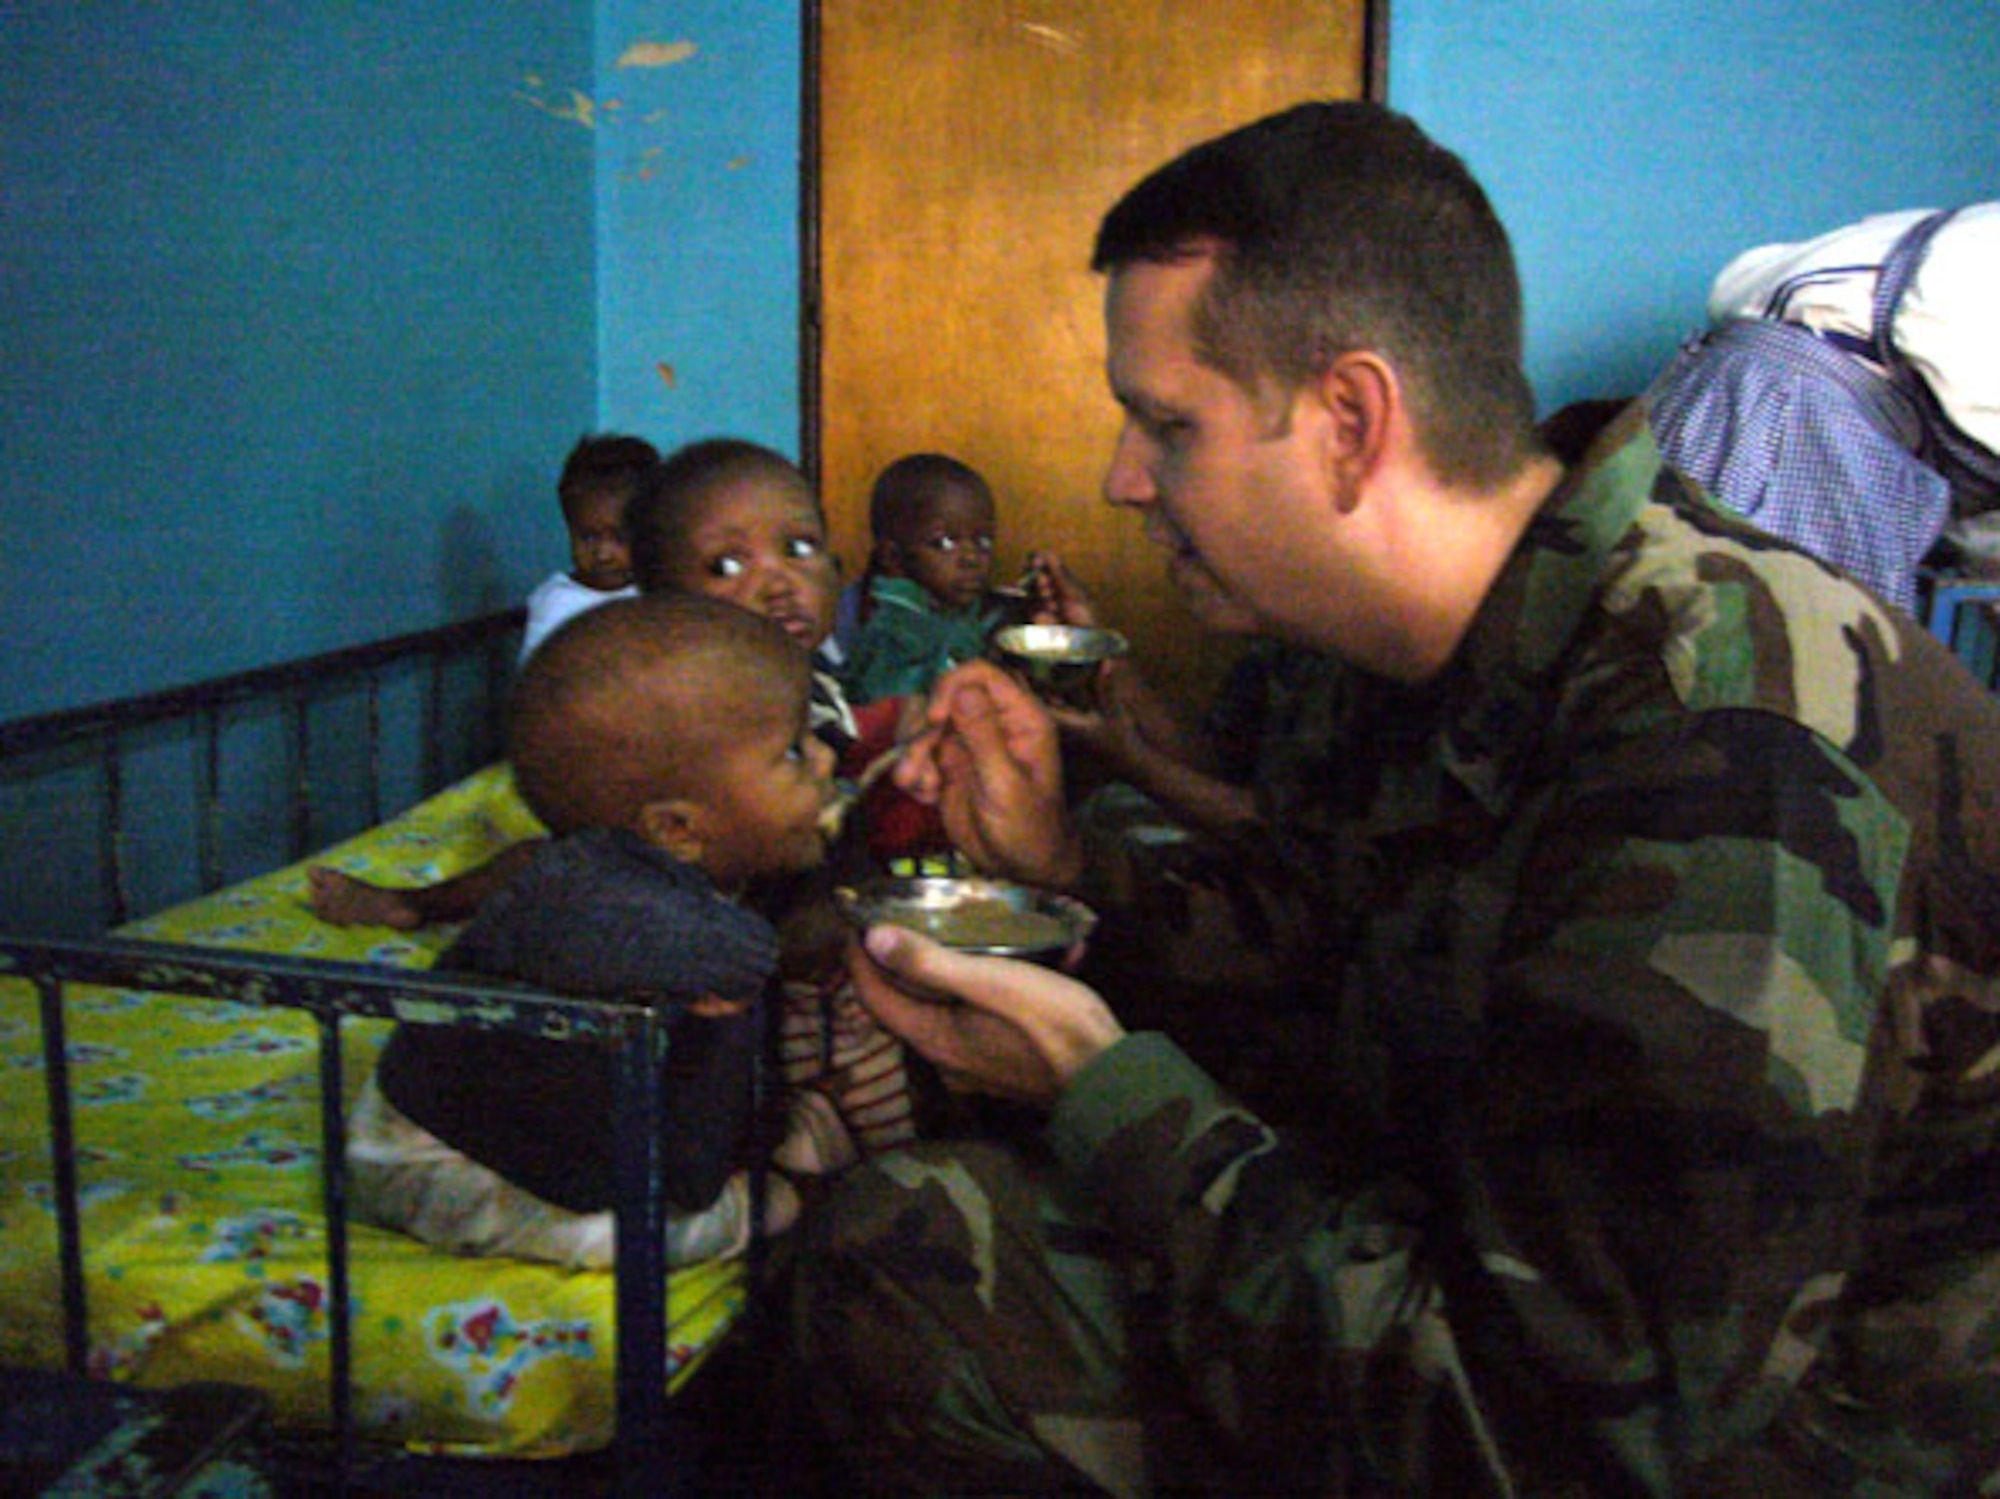 Lt. Col. Jeffrey Renner feeds a Rwandan orphan during a visit in Kigali by Airmen from Ramstein Air Base, Germany. The Airmen delivered school supplies, clothing and blankets donated by the Kaiserslautern Military Community. Colonel Renner is commander of the 787th Air Expeditionary Squadron. (U.S. Air Force photo/Capt. Erin Dorrance) 